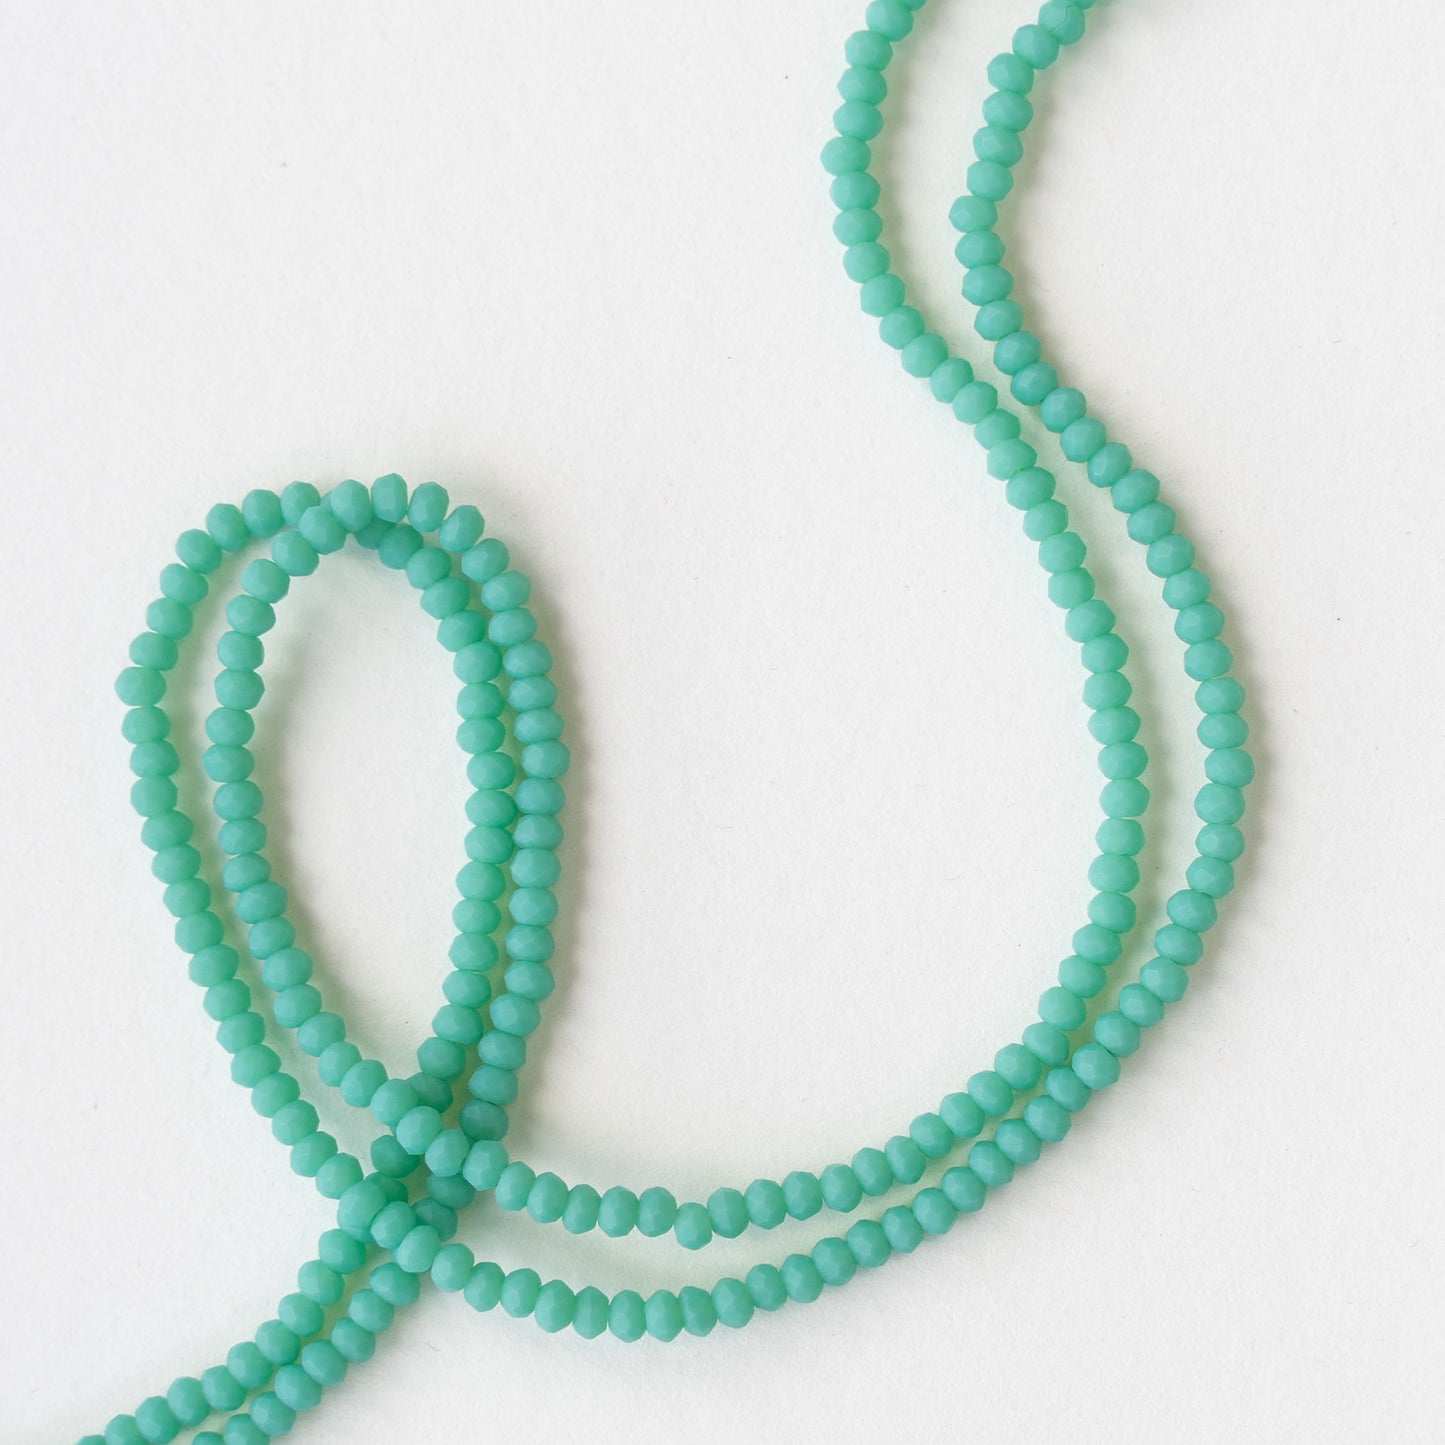 3x2mm Faceted Glass Rondelle Beads - Turquoise - 16 Inches ~ 200 Beads